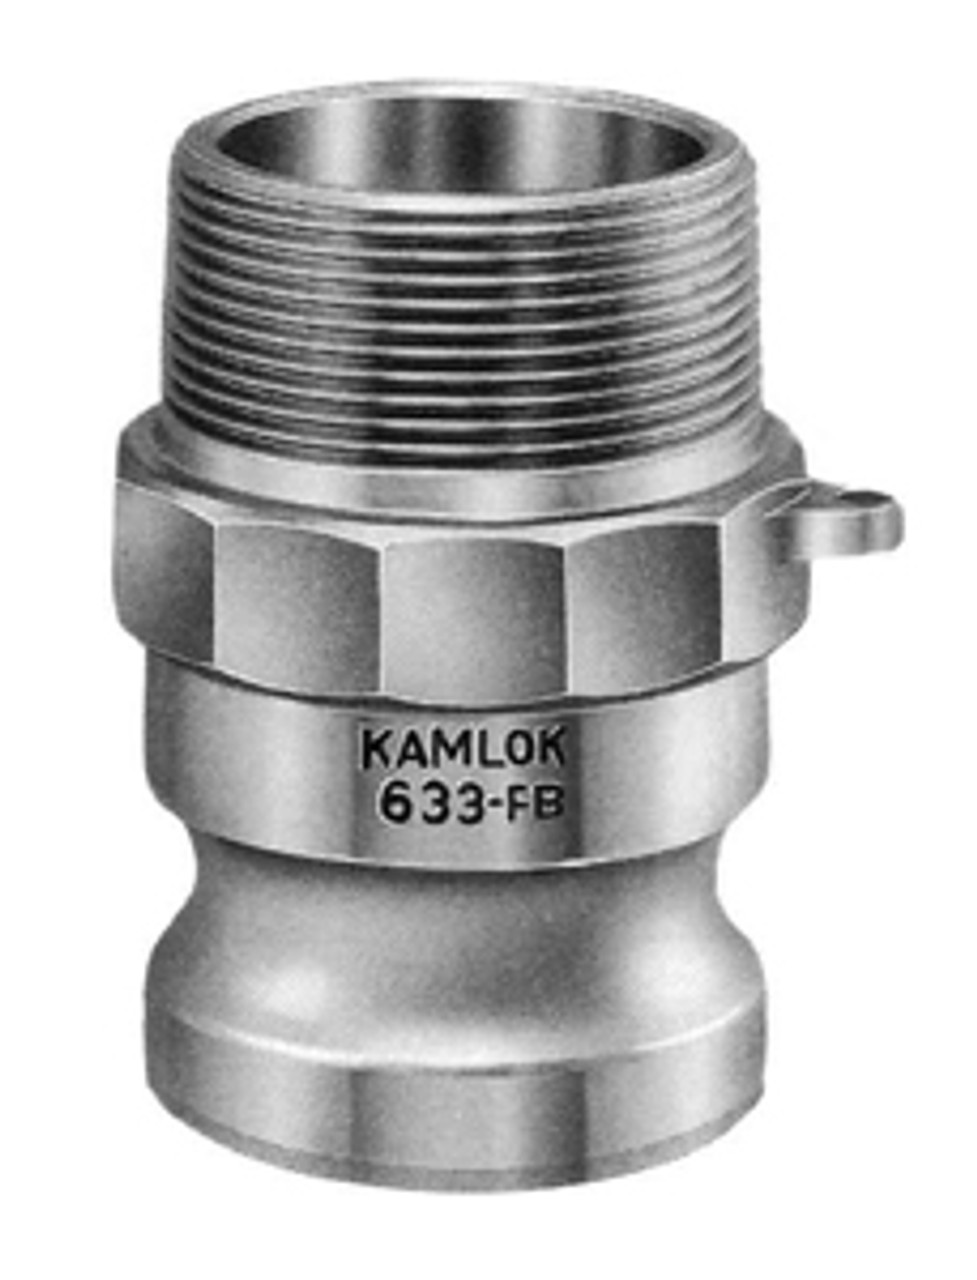 IMPA 351751 Cam and groove coupler - material aluminium Type F (male part with outer thread) - connection 1/2"